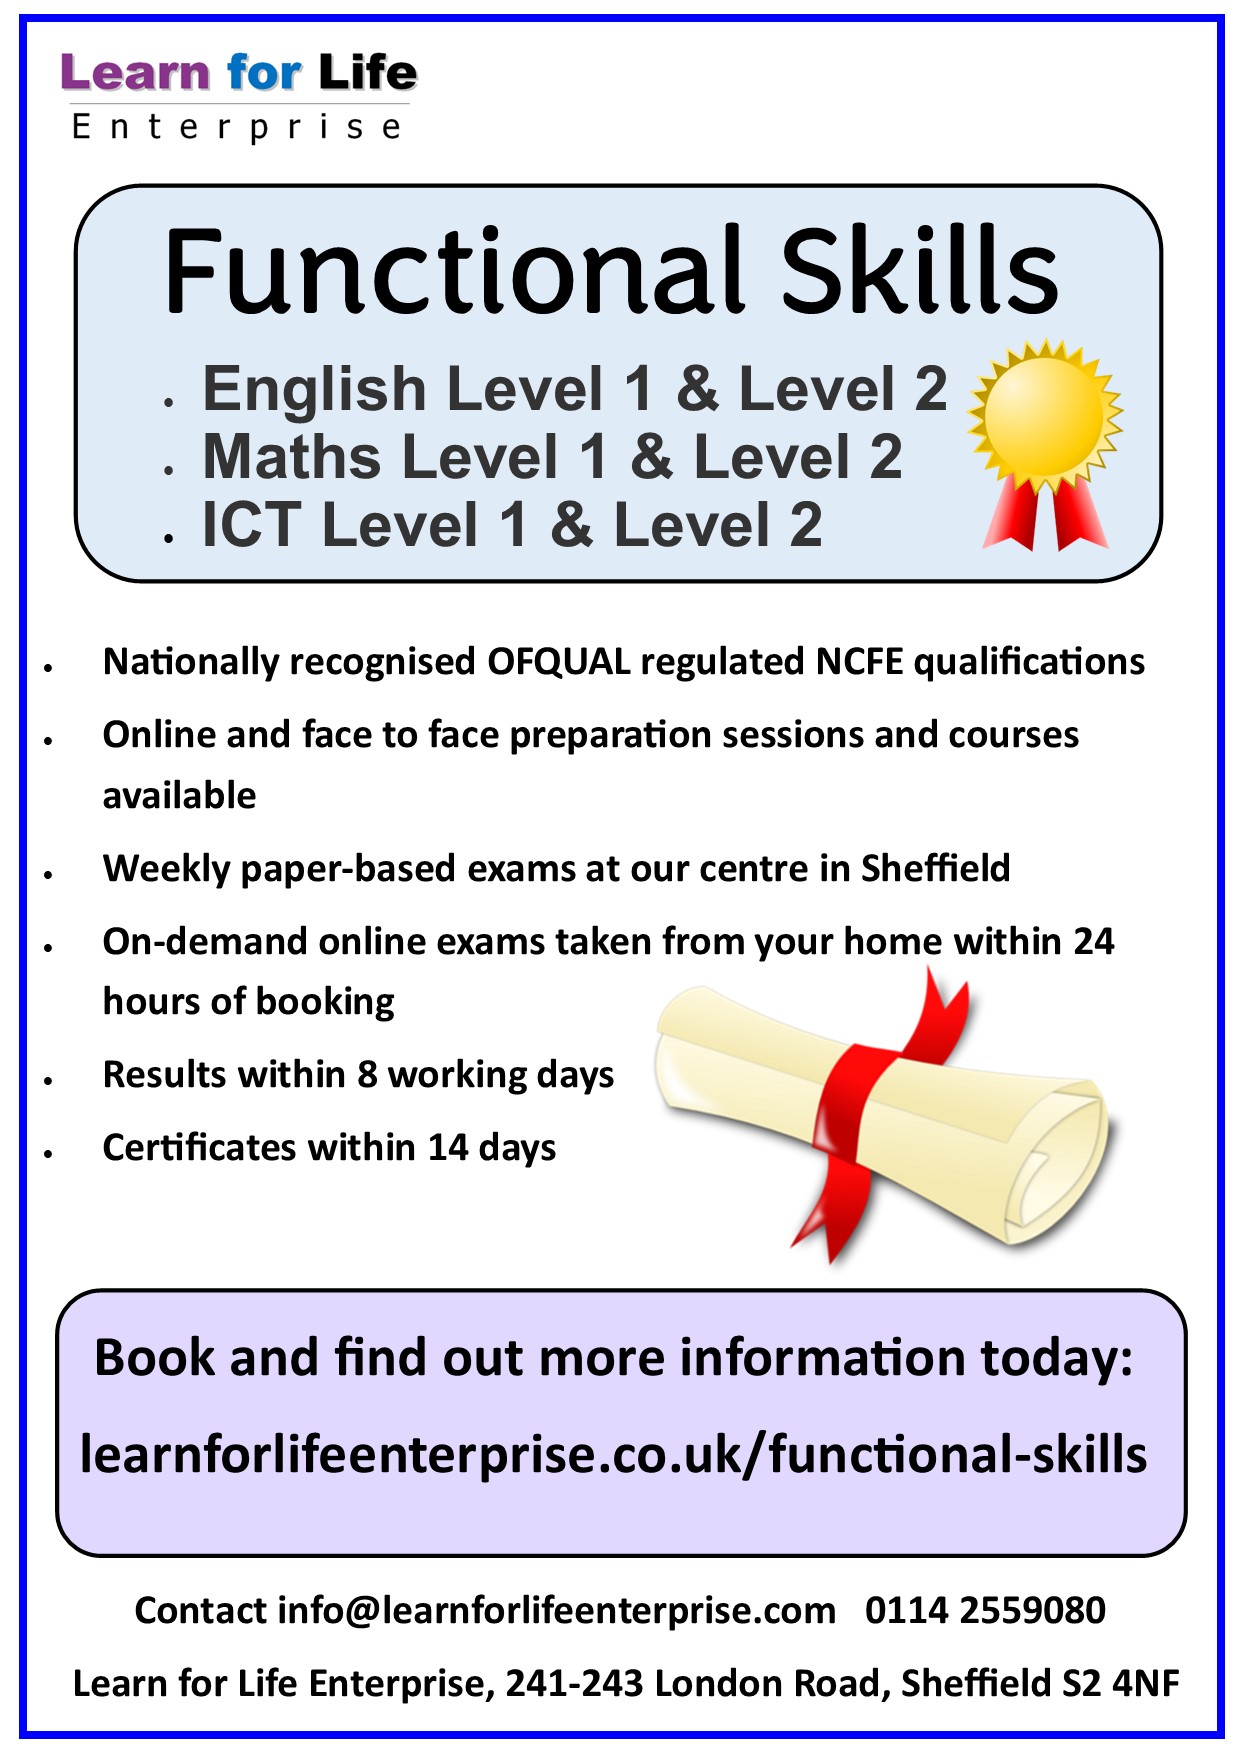 book-your-functional-skills-exam-learn-for-life-enterprise